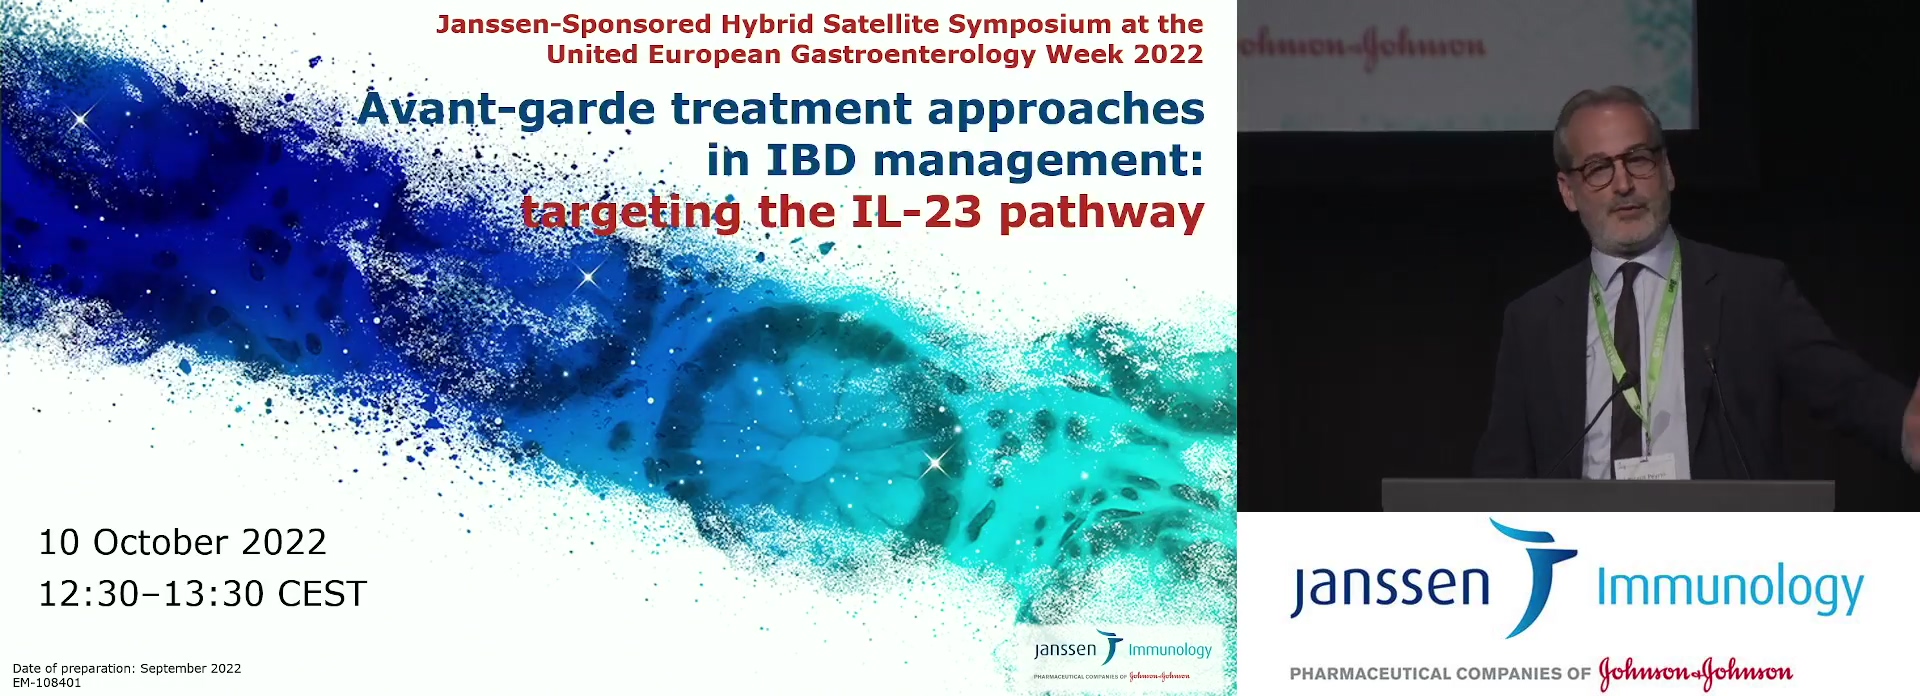 Avant-garde treatment approaches in IBD management: targeting the IL-23 pathway (Janssen)